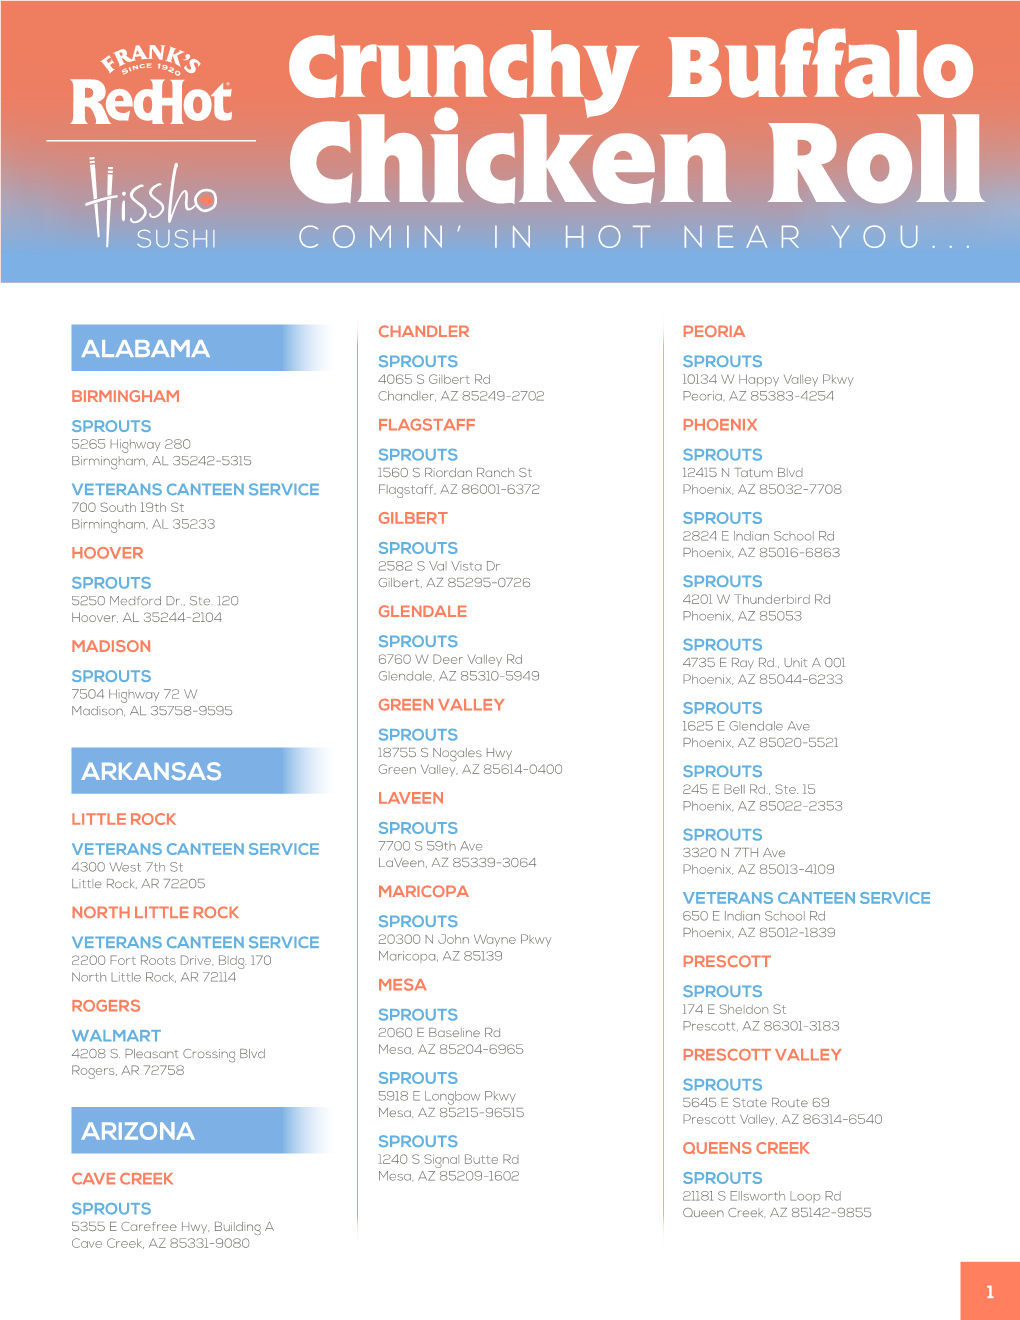 Chicken Roll COMIN’ in HOT NEAR YOU